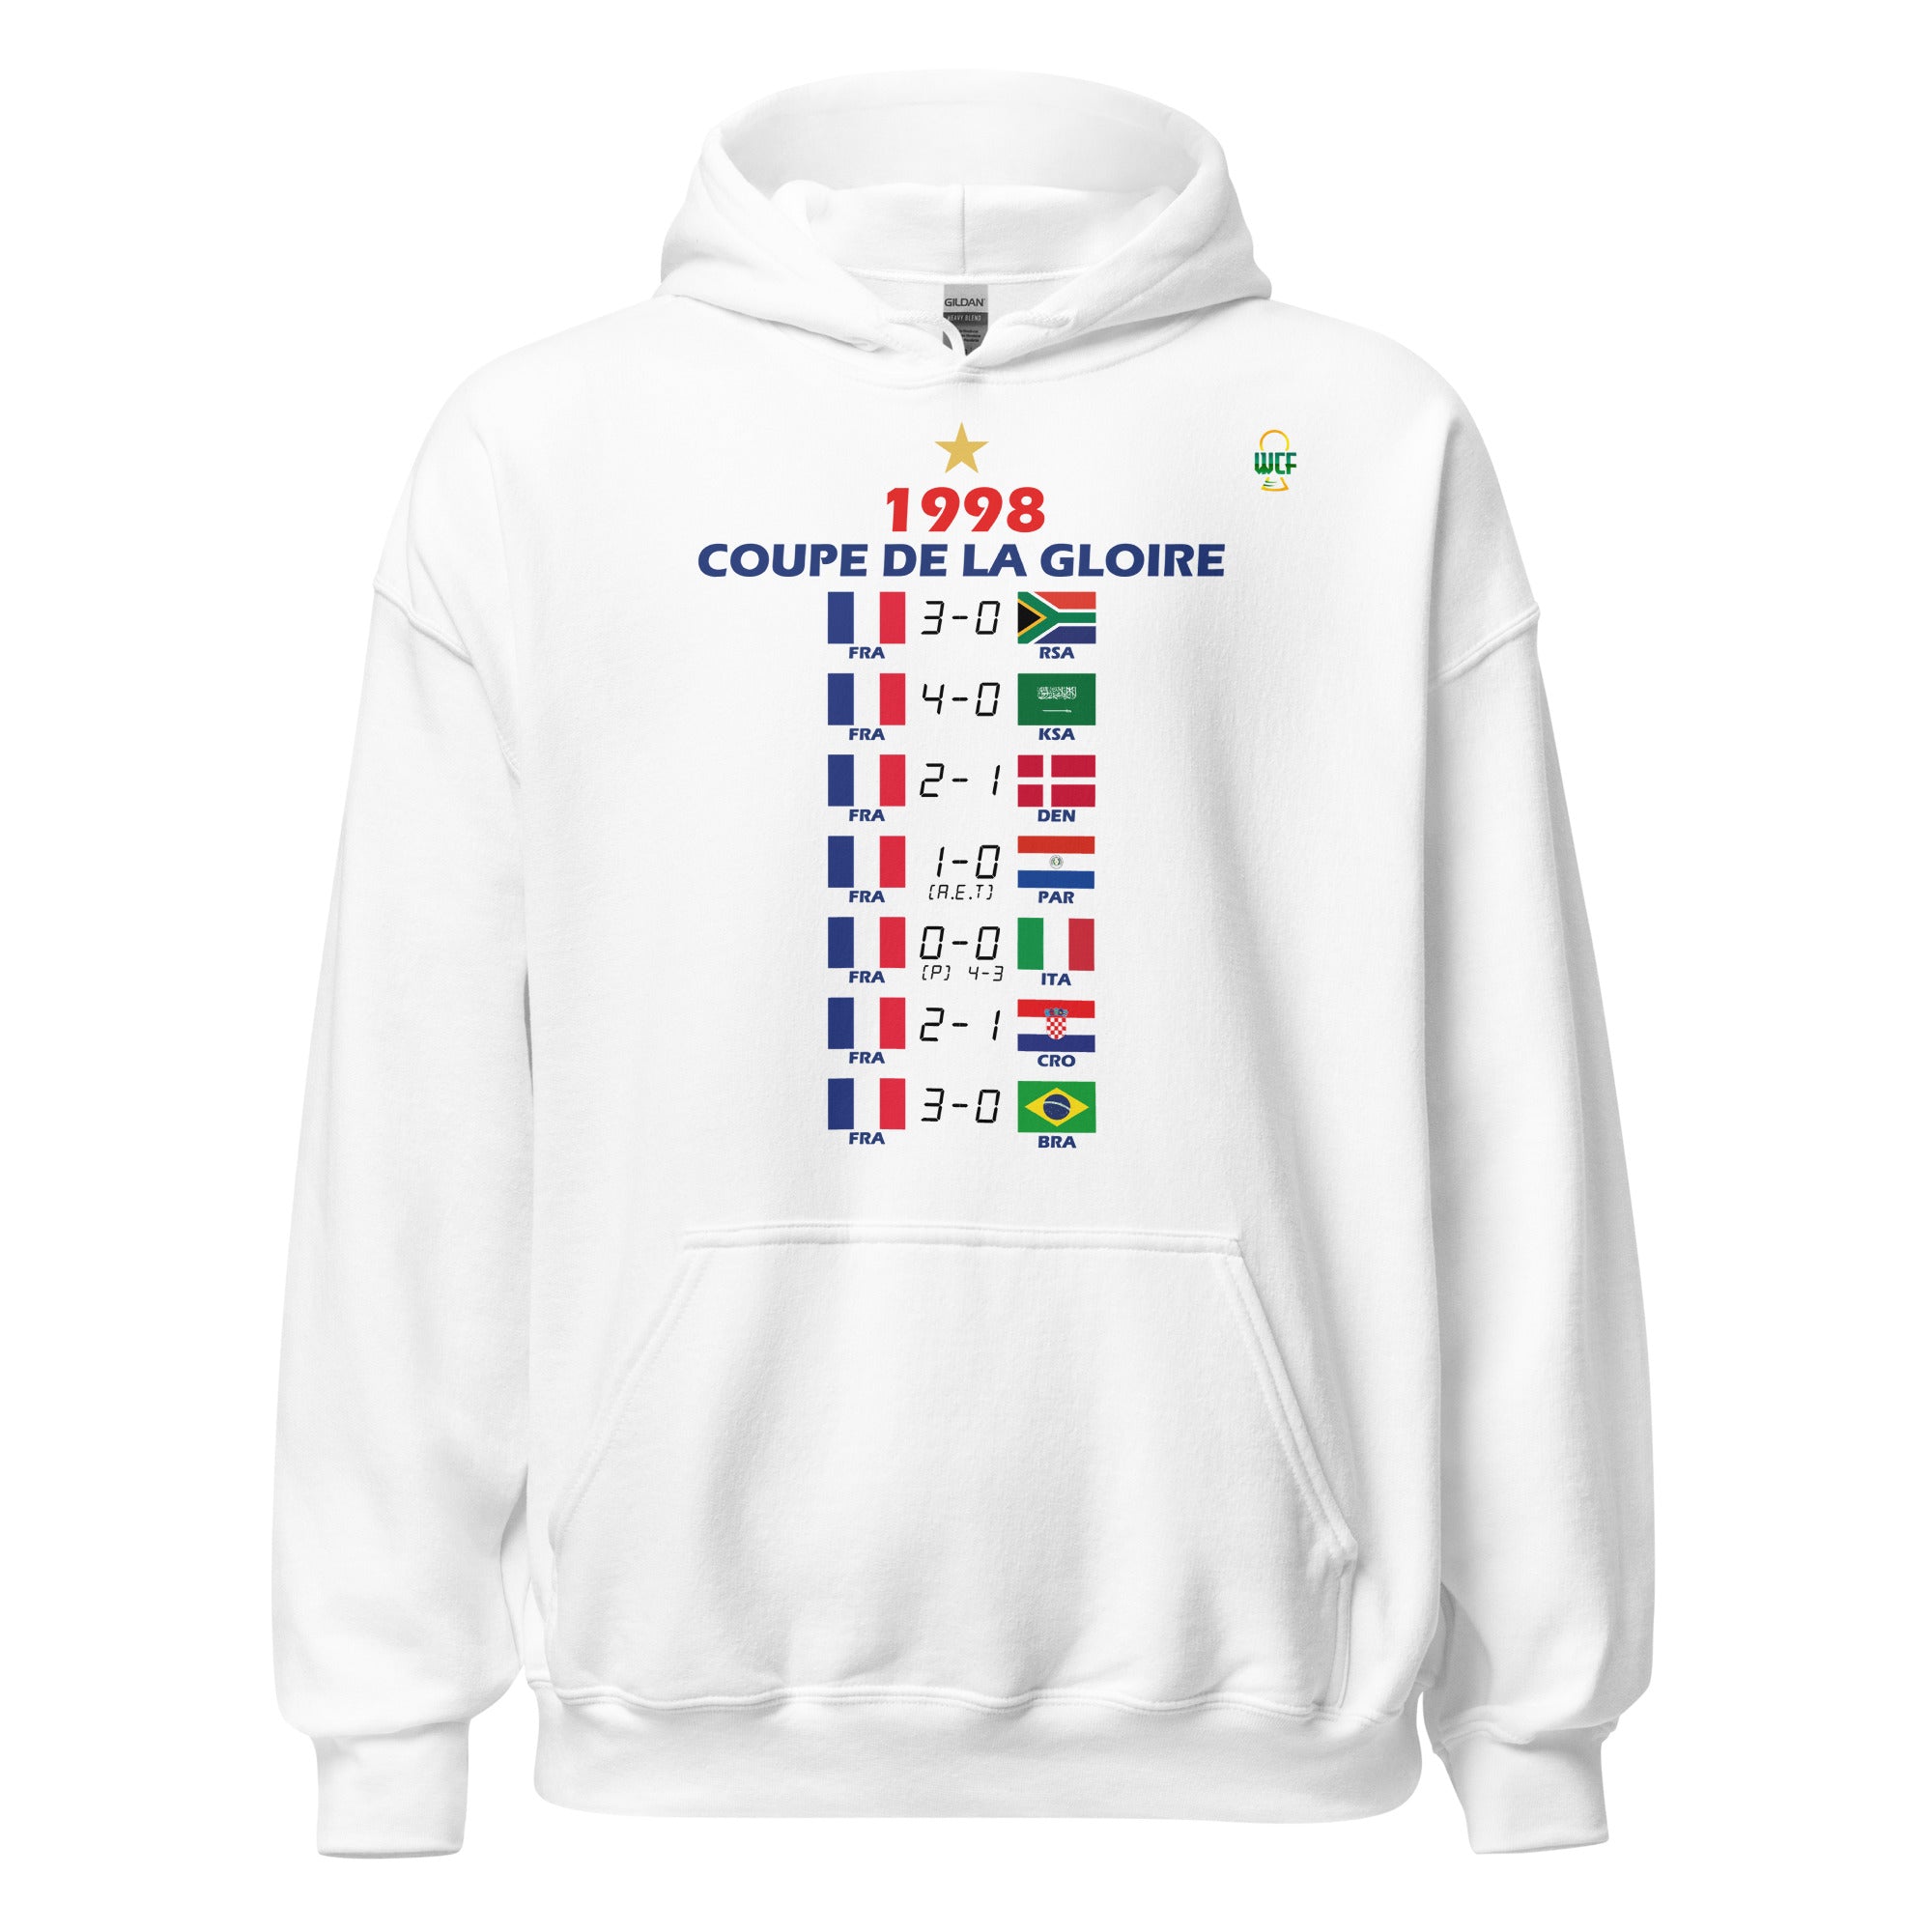 World Cup 1998 Hoodie - Road to the Glory - FRANCE